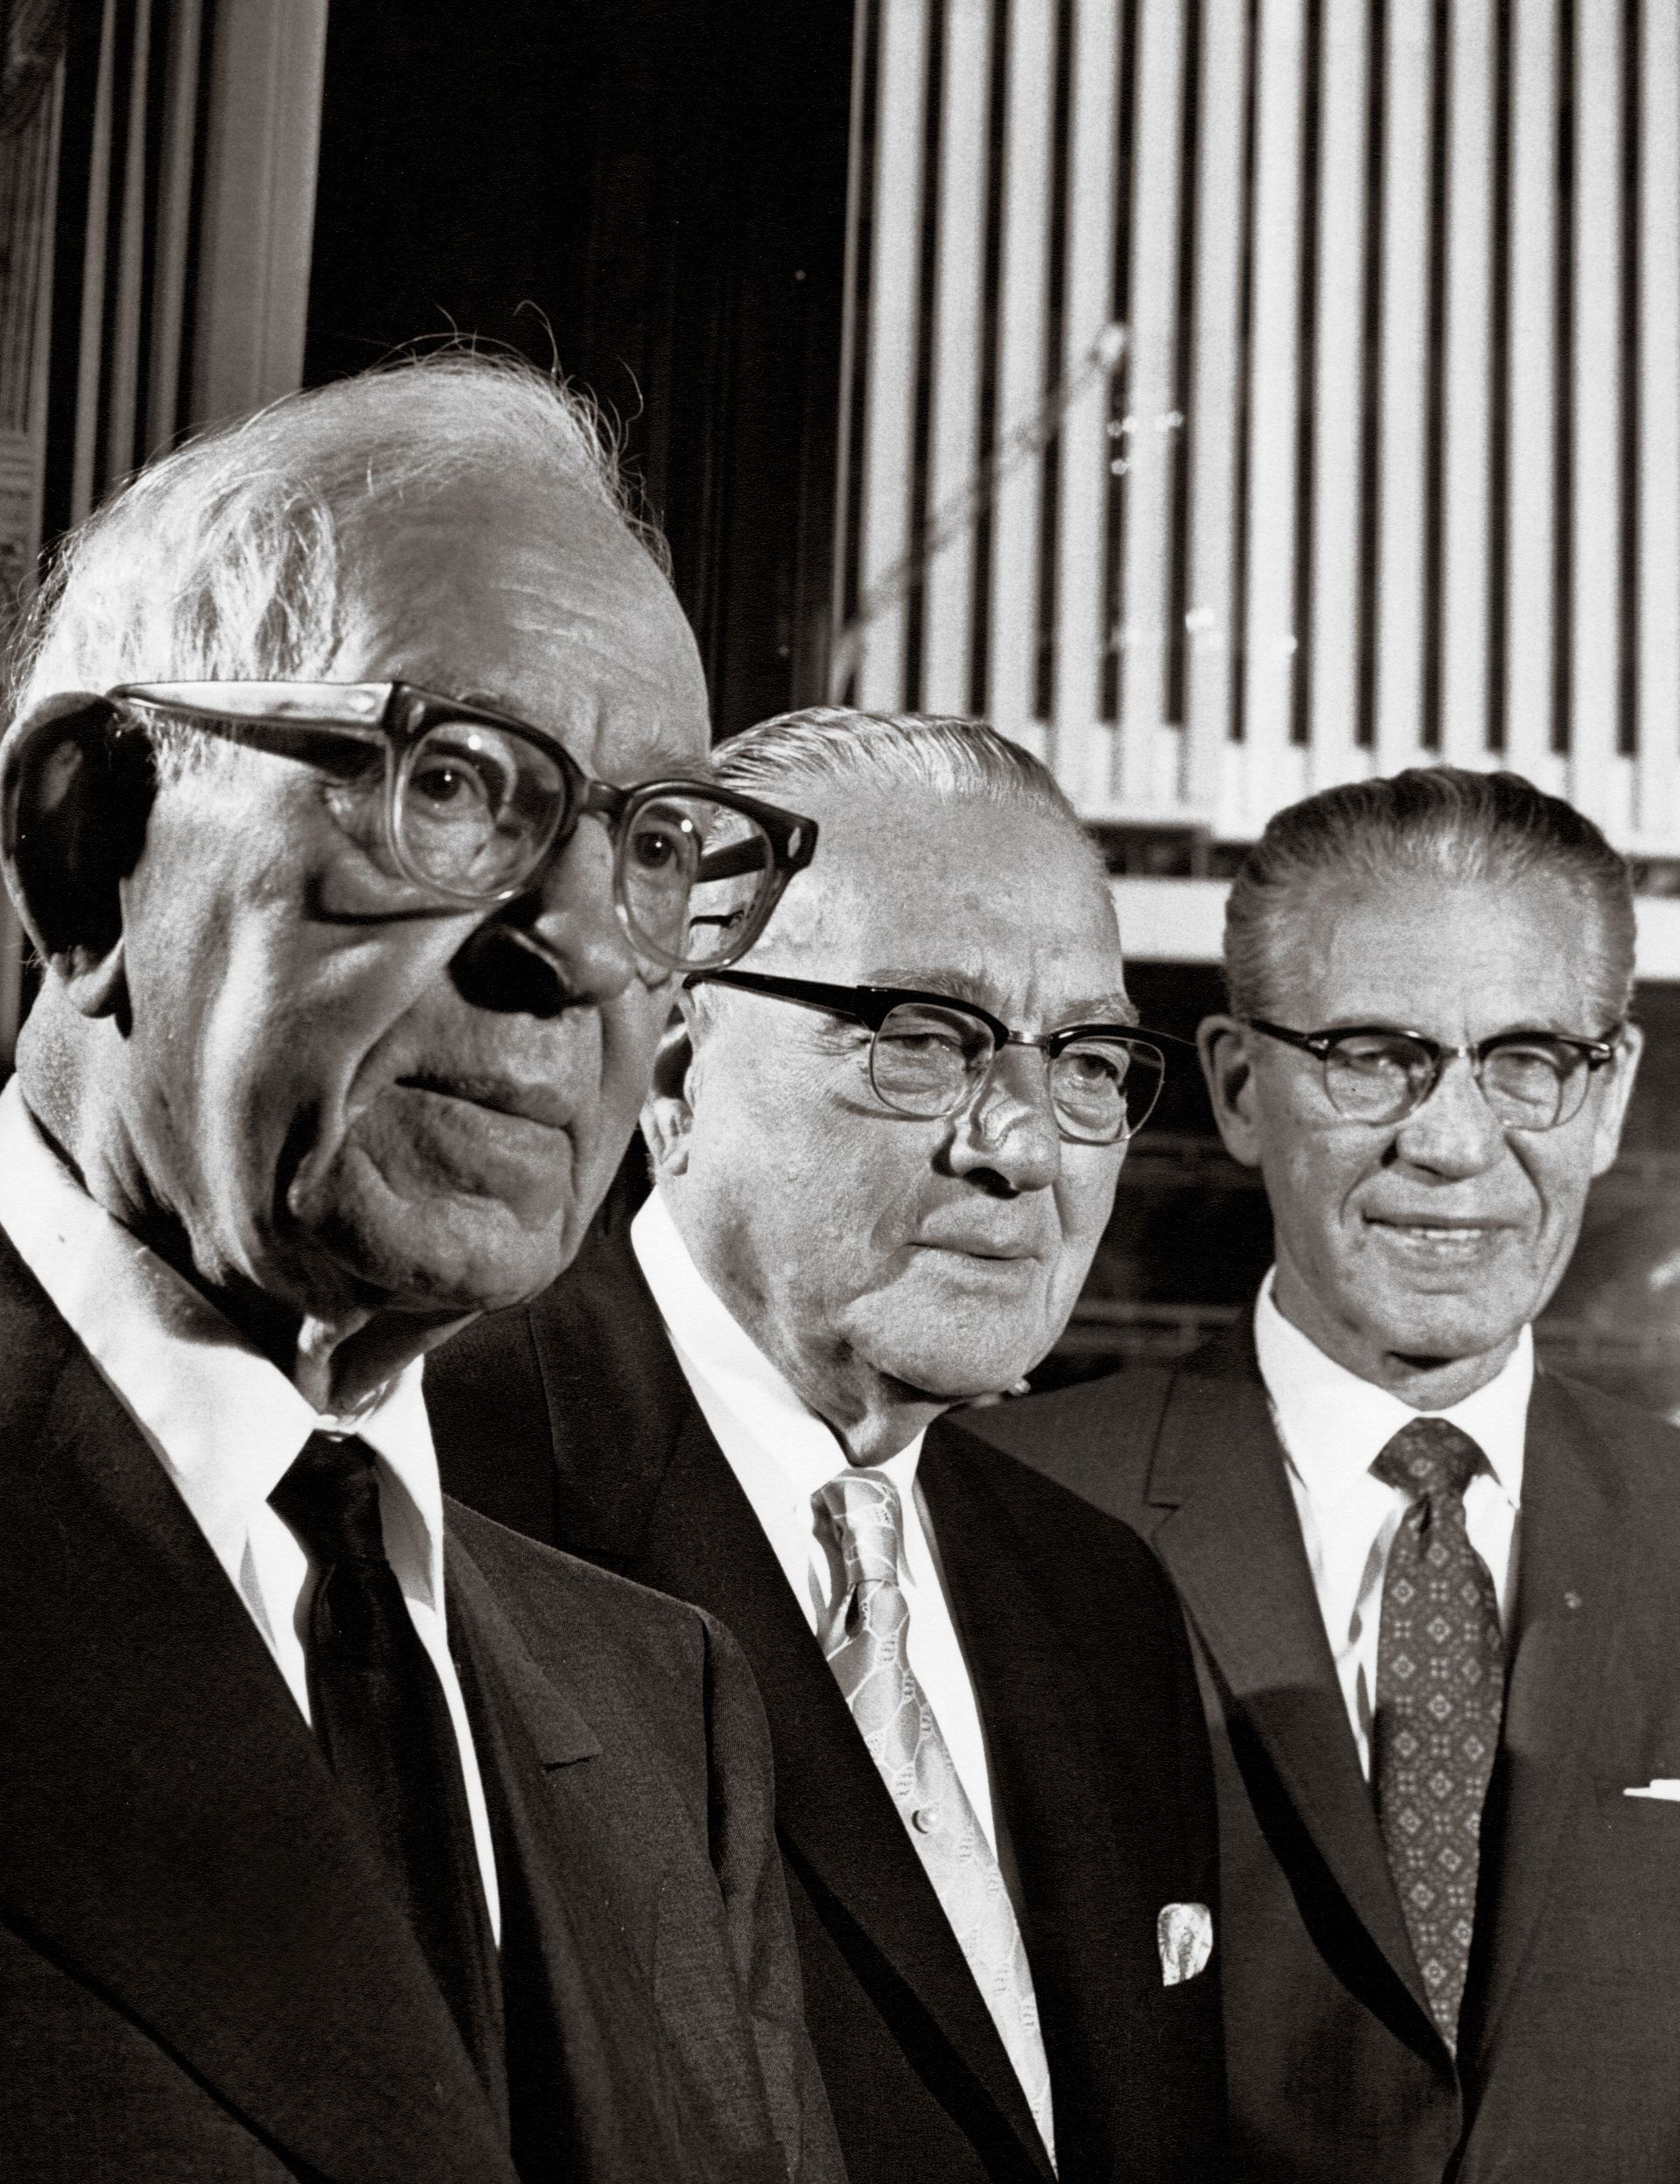 Joseph Fielding Smith with his counselors in the First Presidency, Harold B. Lee and N. Eldon Tanner. Teachings of Presidents of the Church: Joseph Fielding Smith (2013), 28